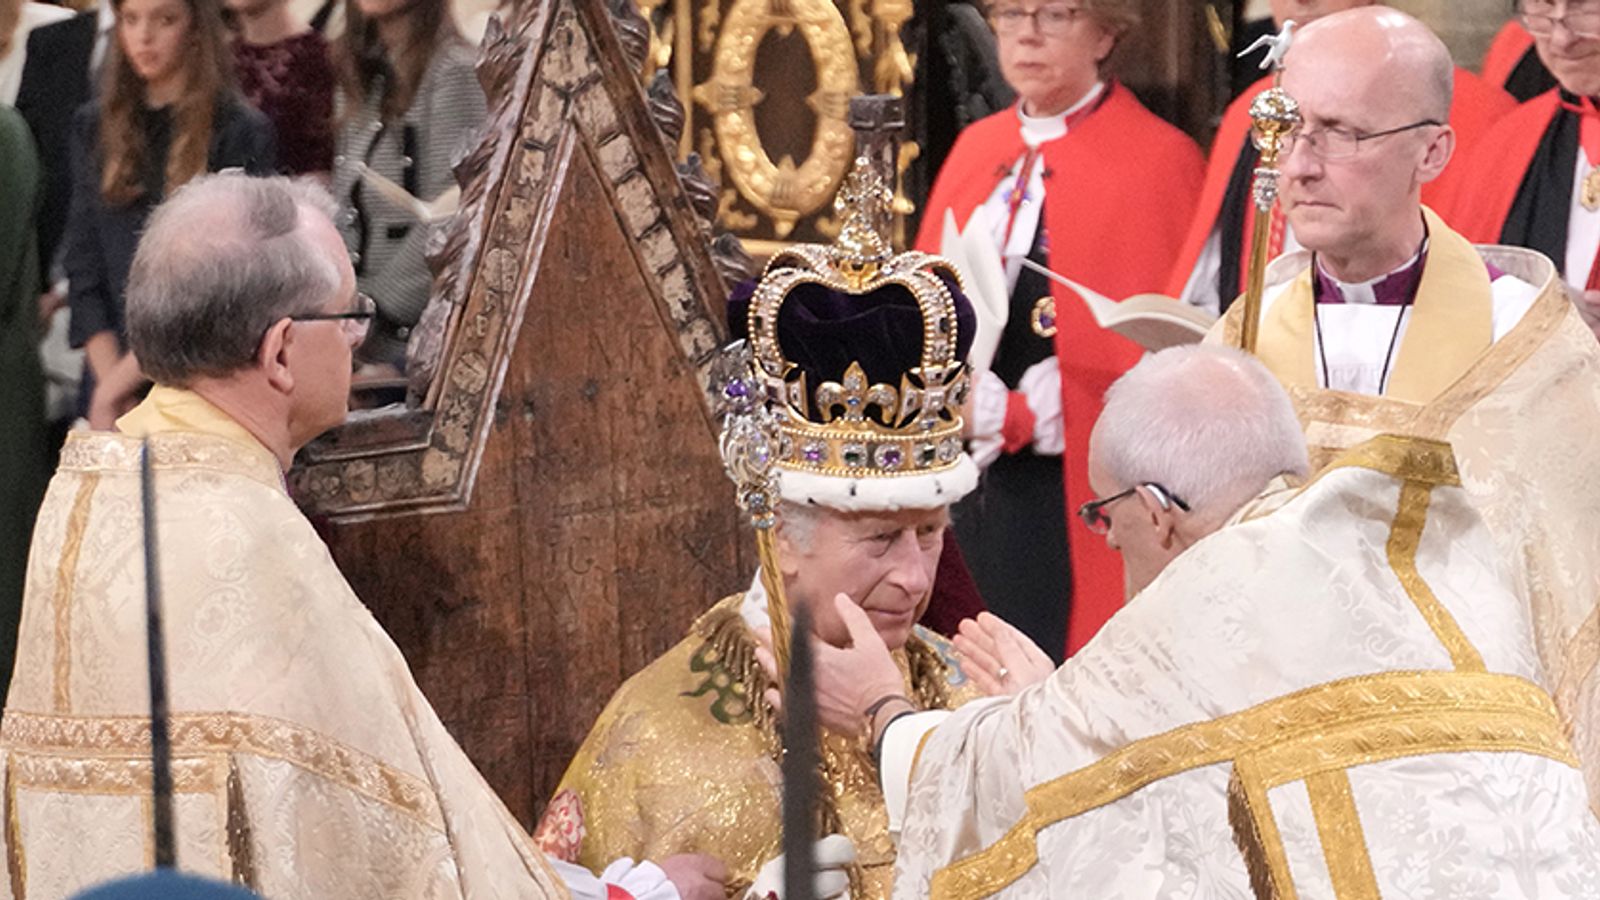 The King crowned by Archbishop of Canterbury in historic coronation at Westminster Abbey